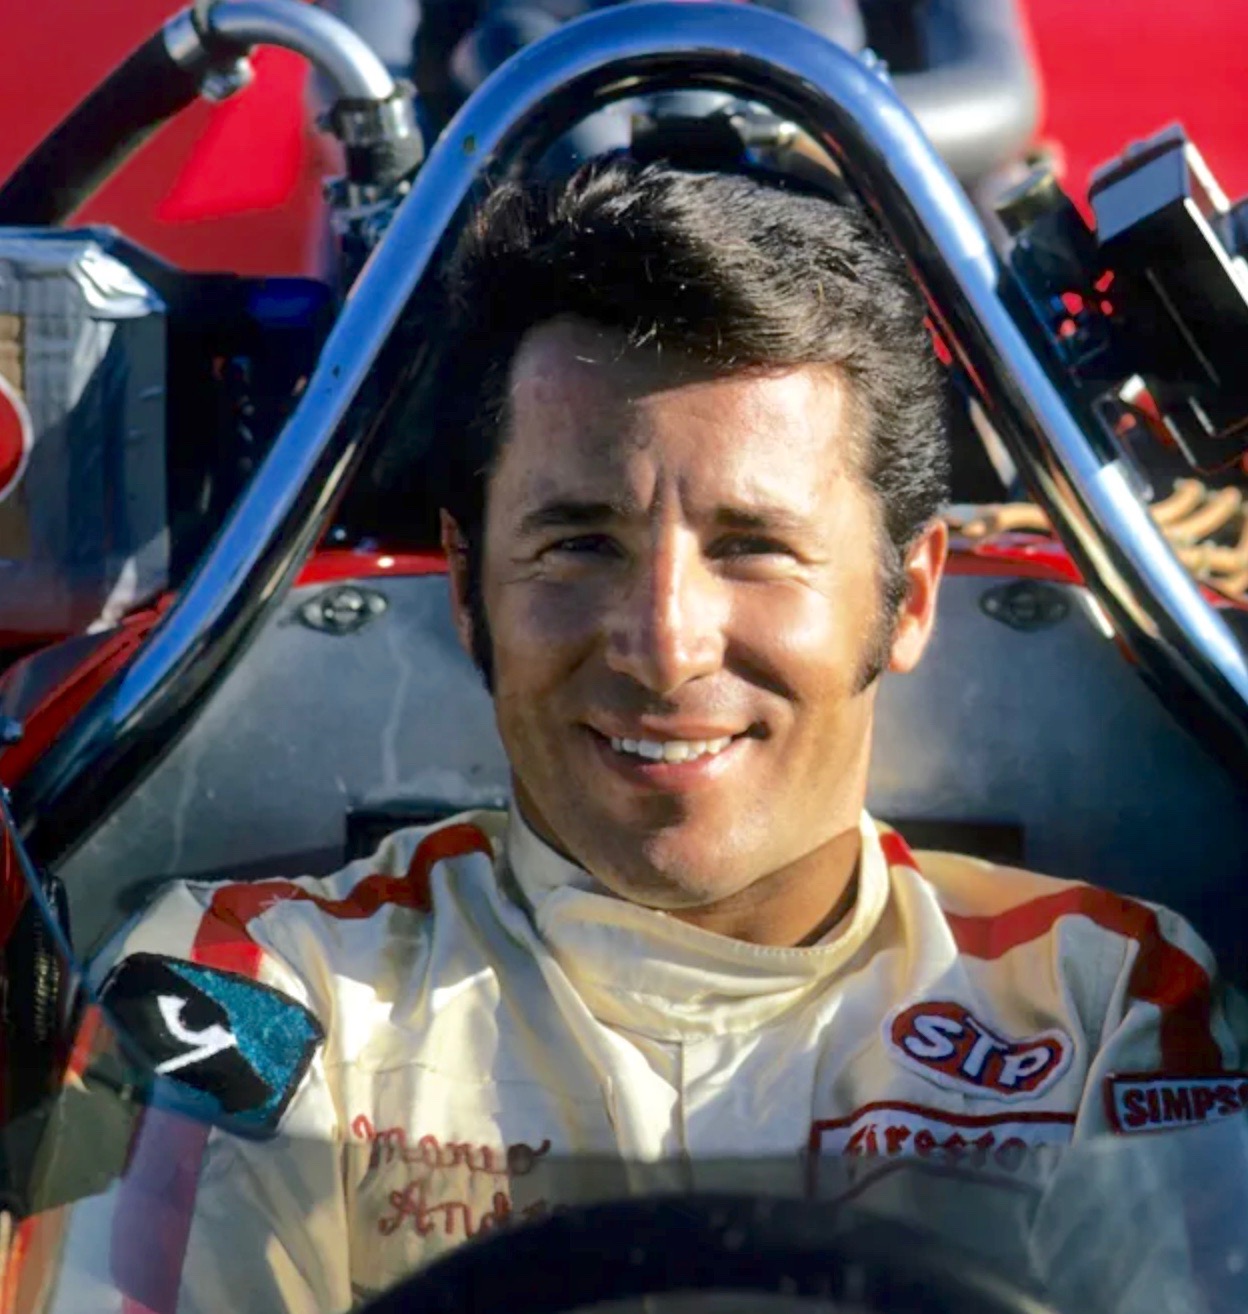 Marco Andretti: Should I consider eating a fresh crow? mario andretti. theo...